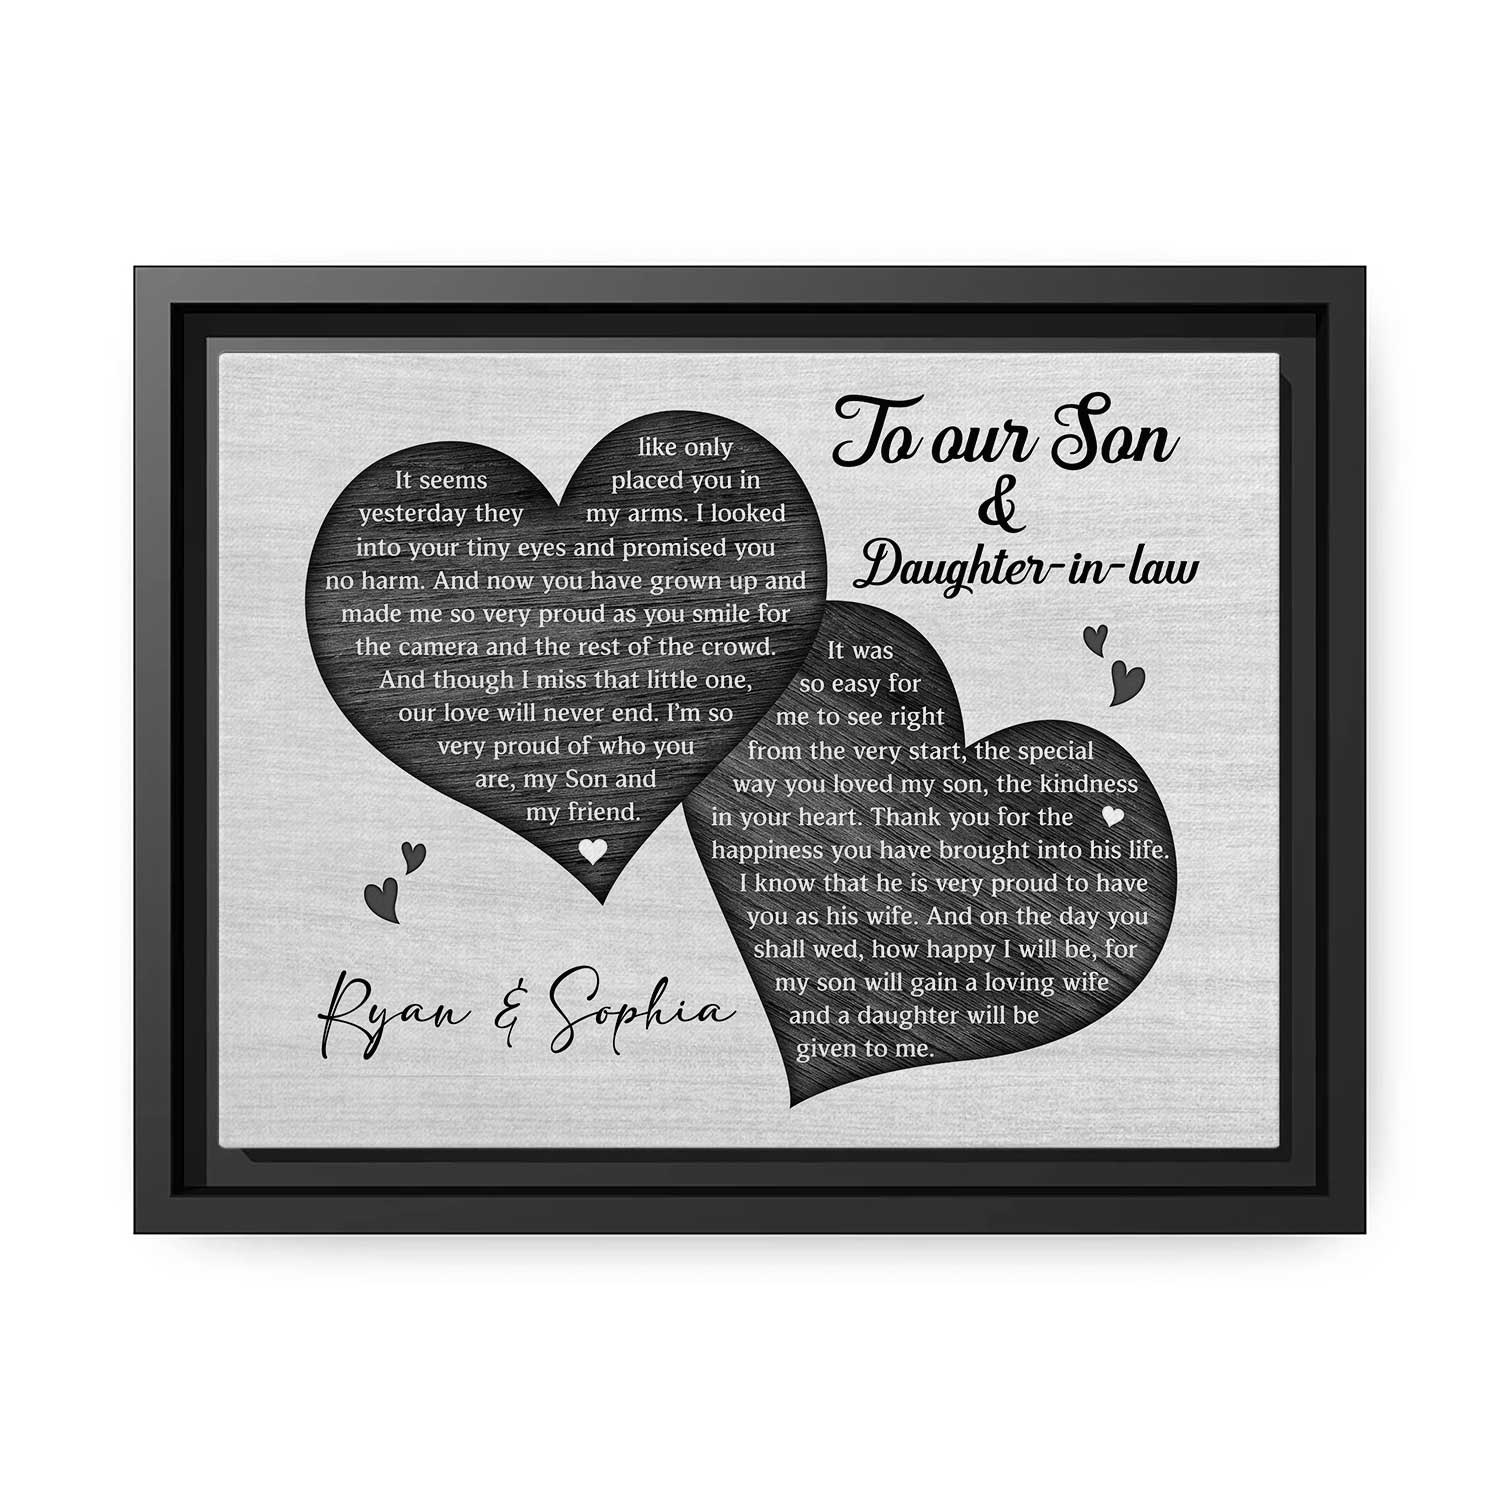 To Our Son & Daughter In Law - Personalized Wedding gift For Son & Daughter In Law from Parents of the Groom - Custom Canvas Print - MyMindfulGifts